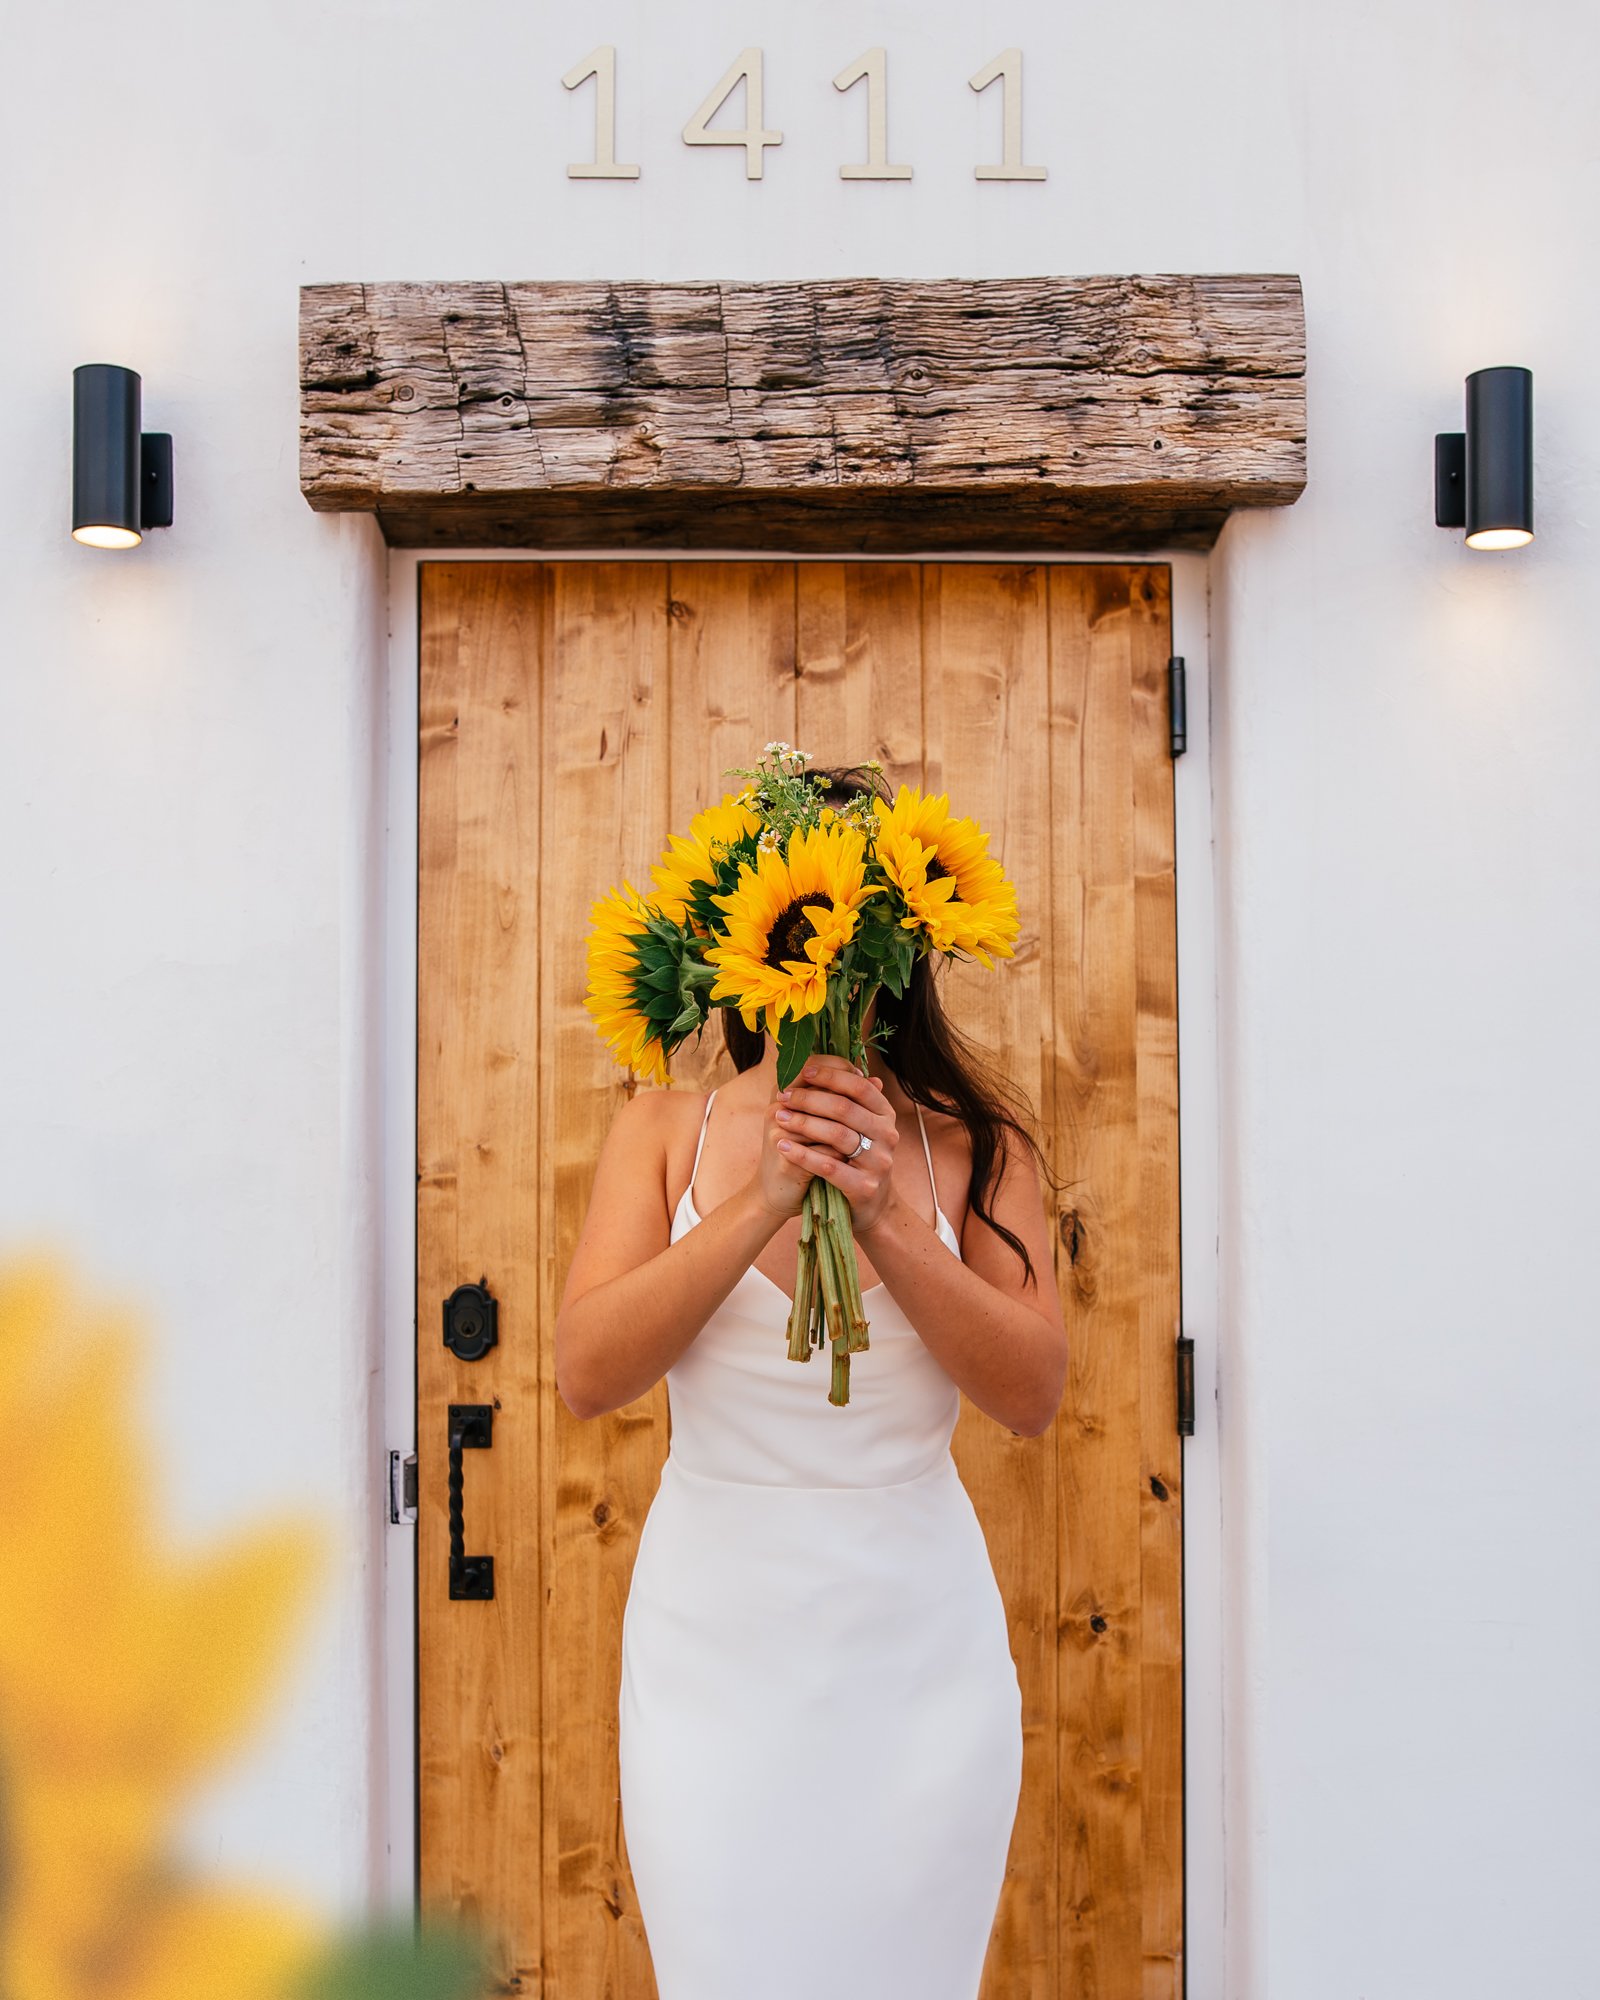 Girl wearing a white wedding dress while holding sunflowers in front of her face